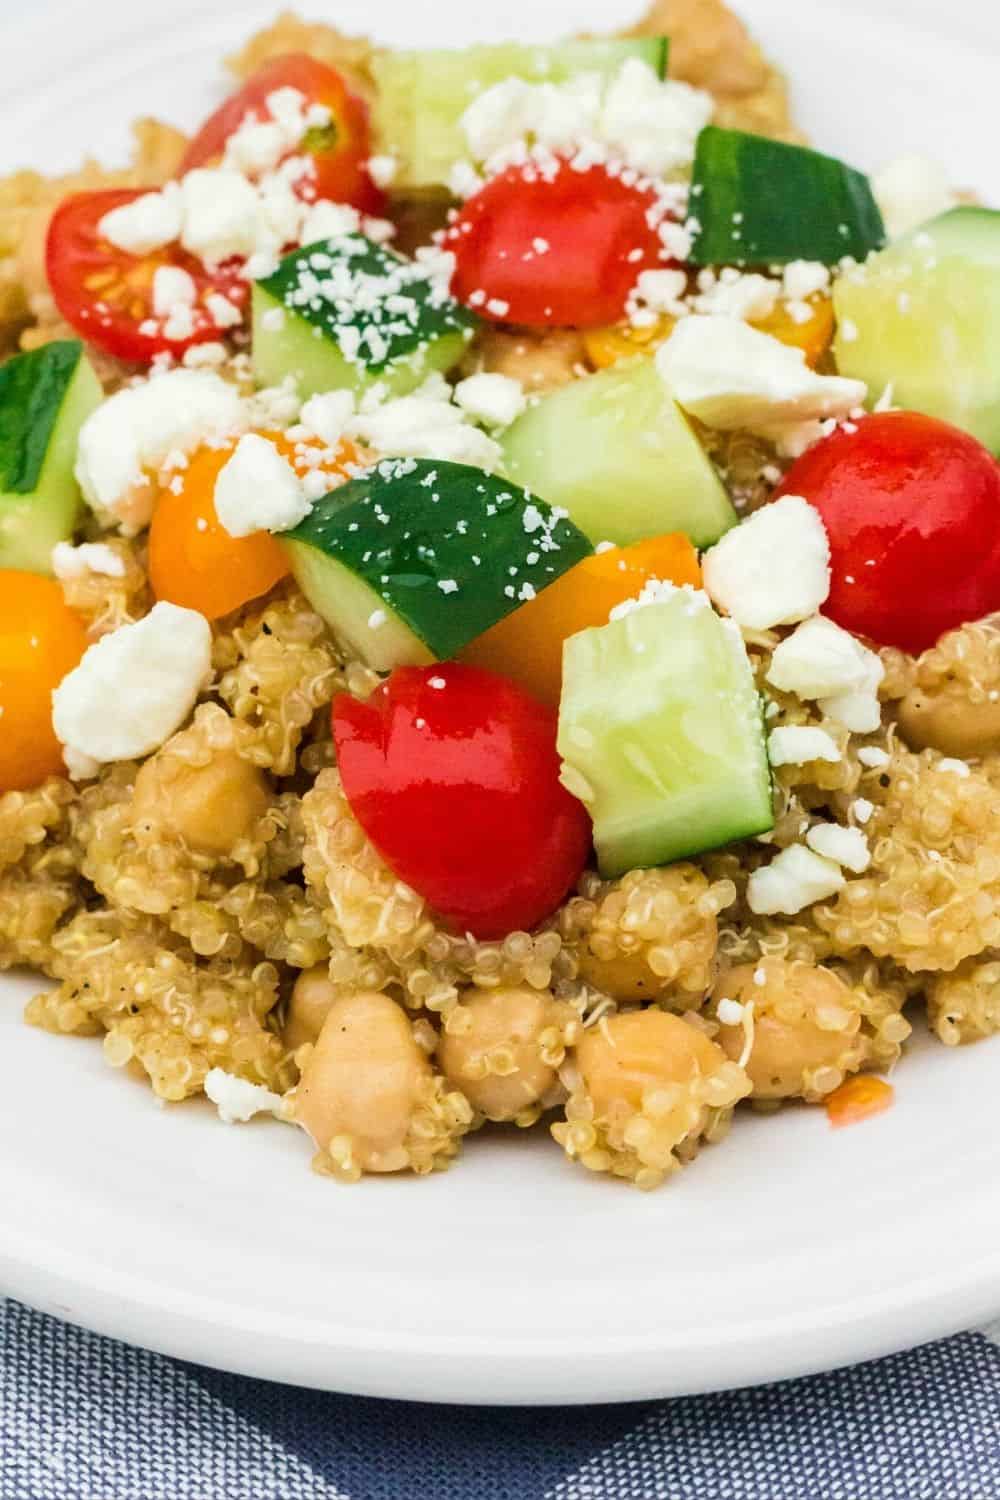 Greek chickpeas and quinoa served on a white plate, topped with cucumbers, tomatoes, and feta cheese